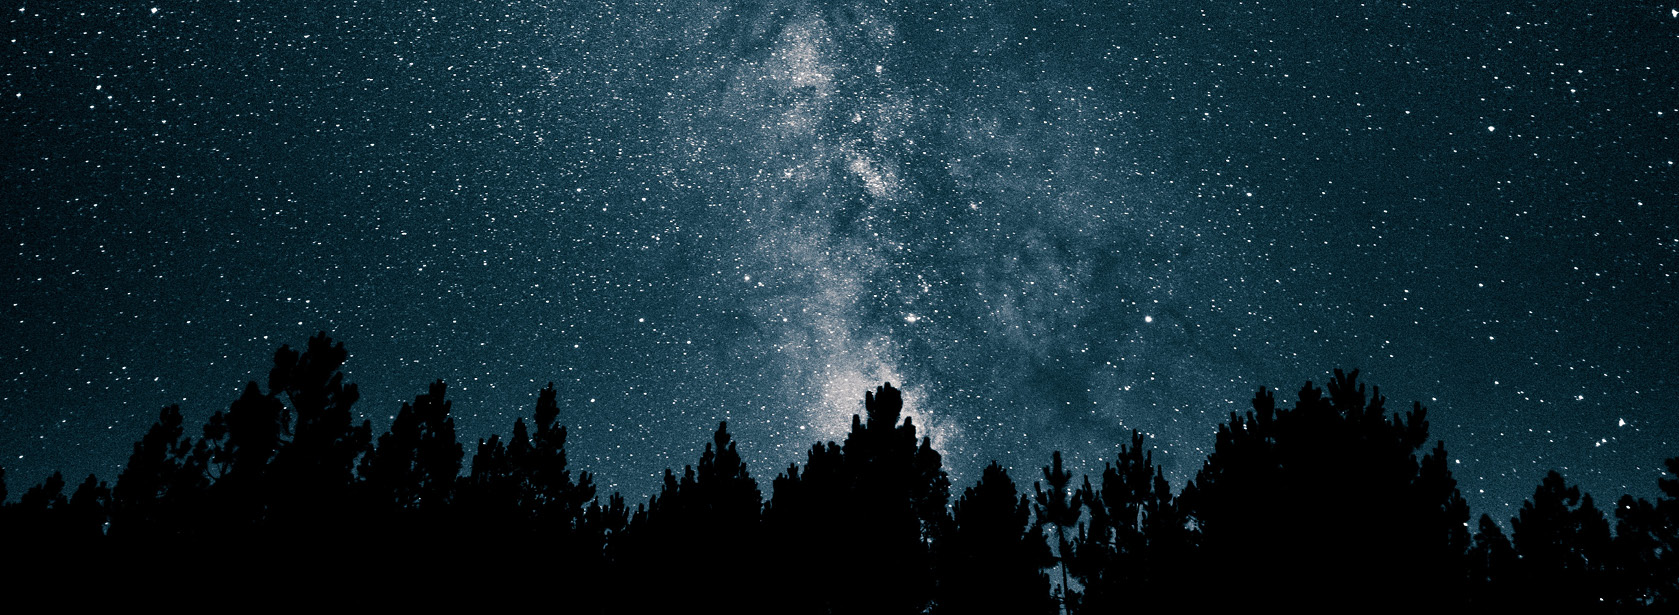 A starry night sky over a dark forest.